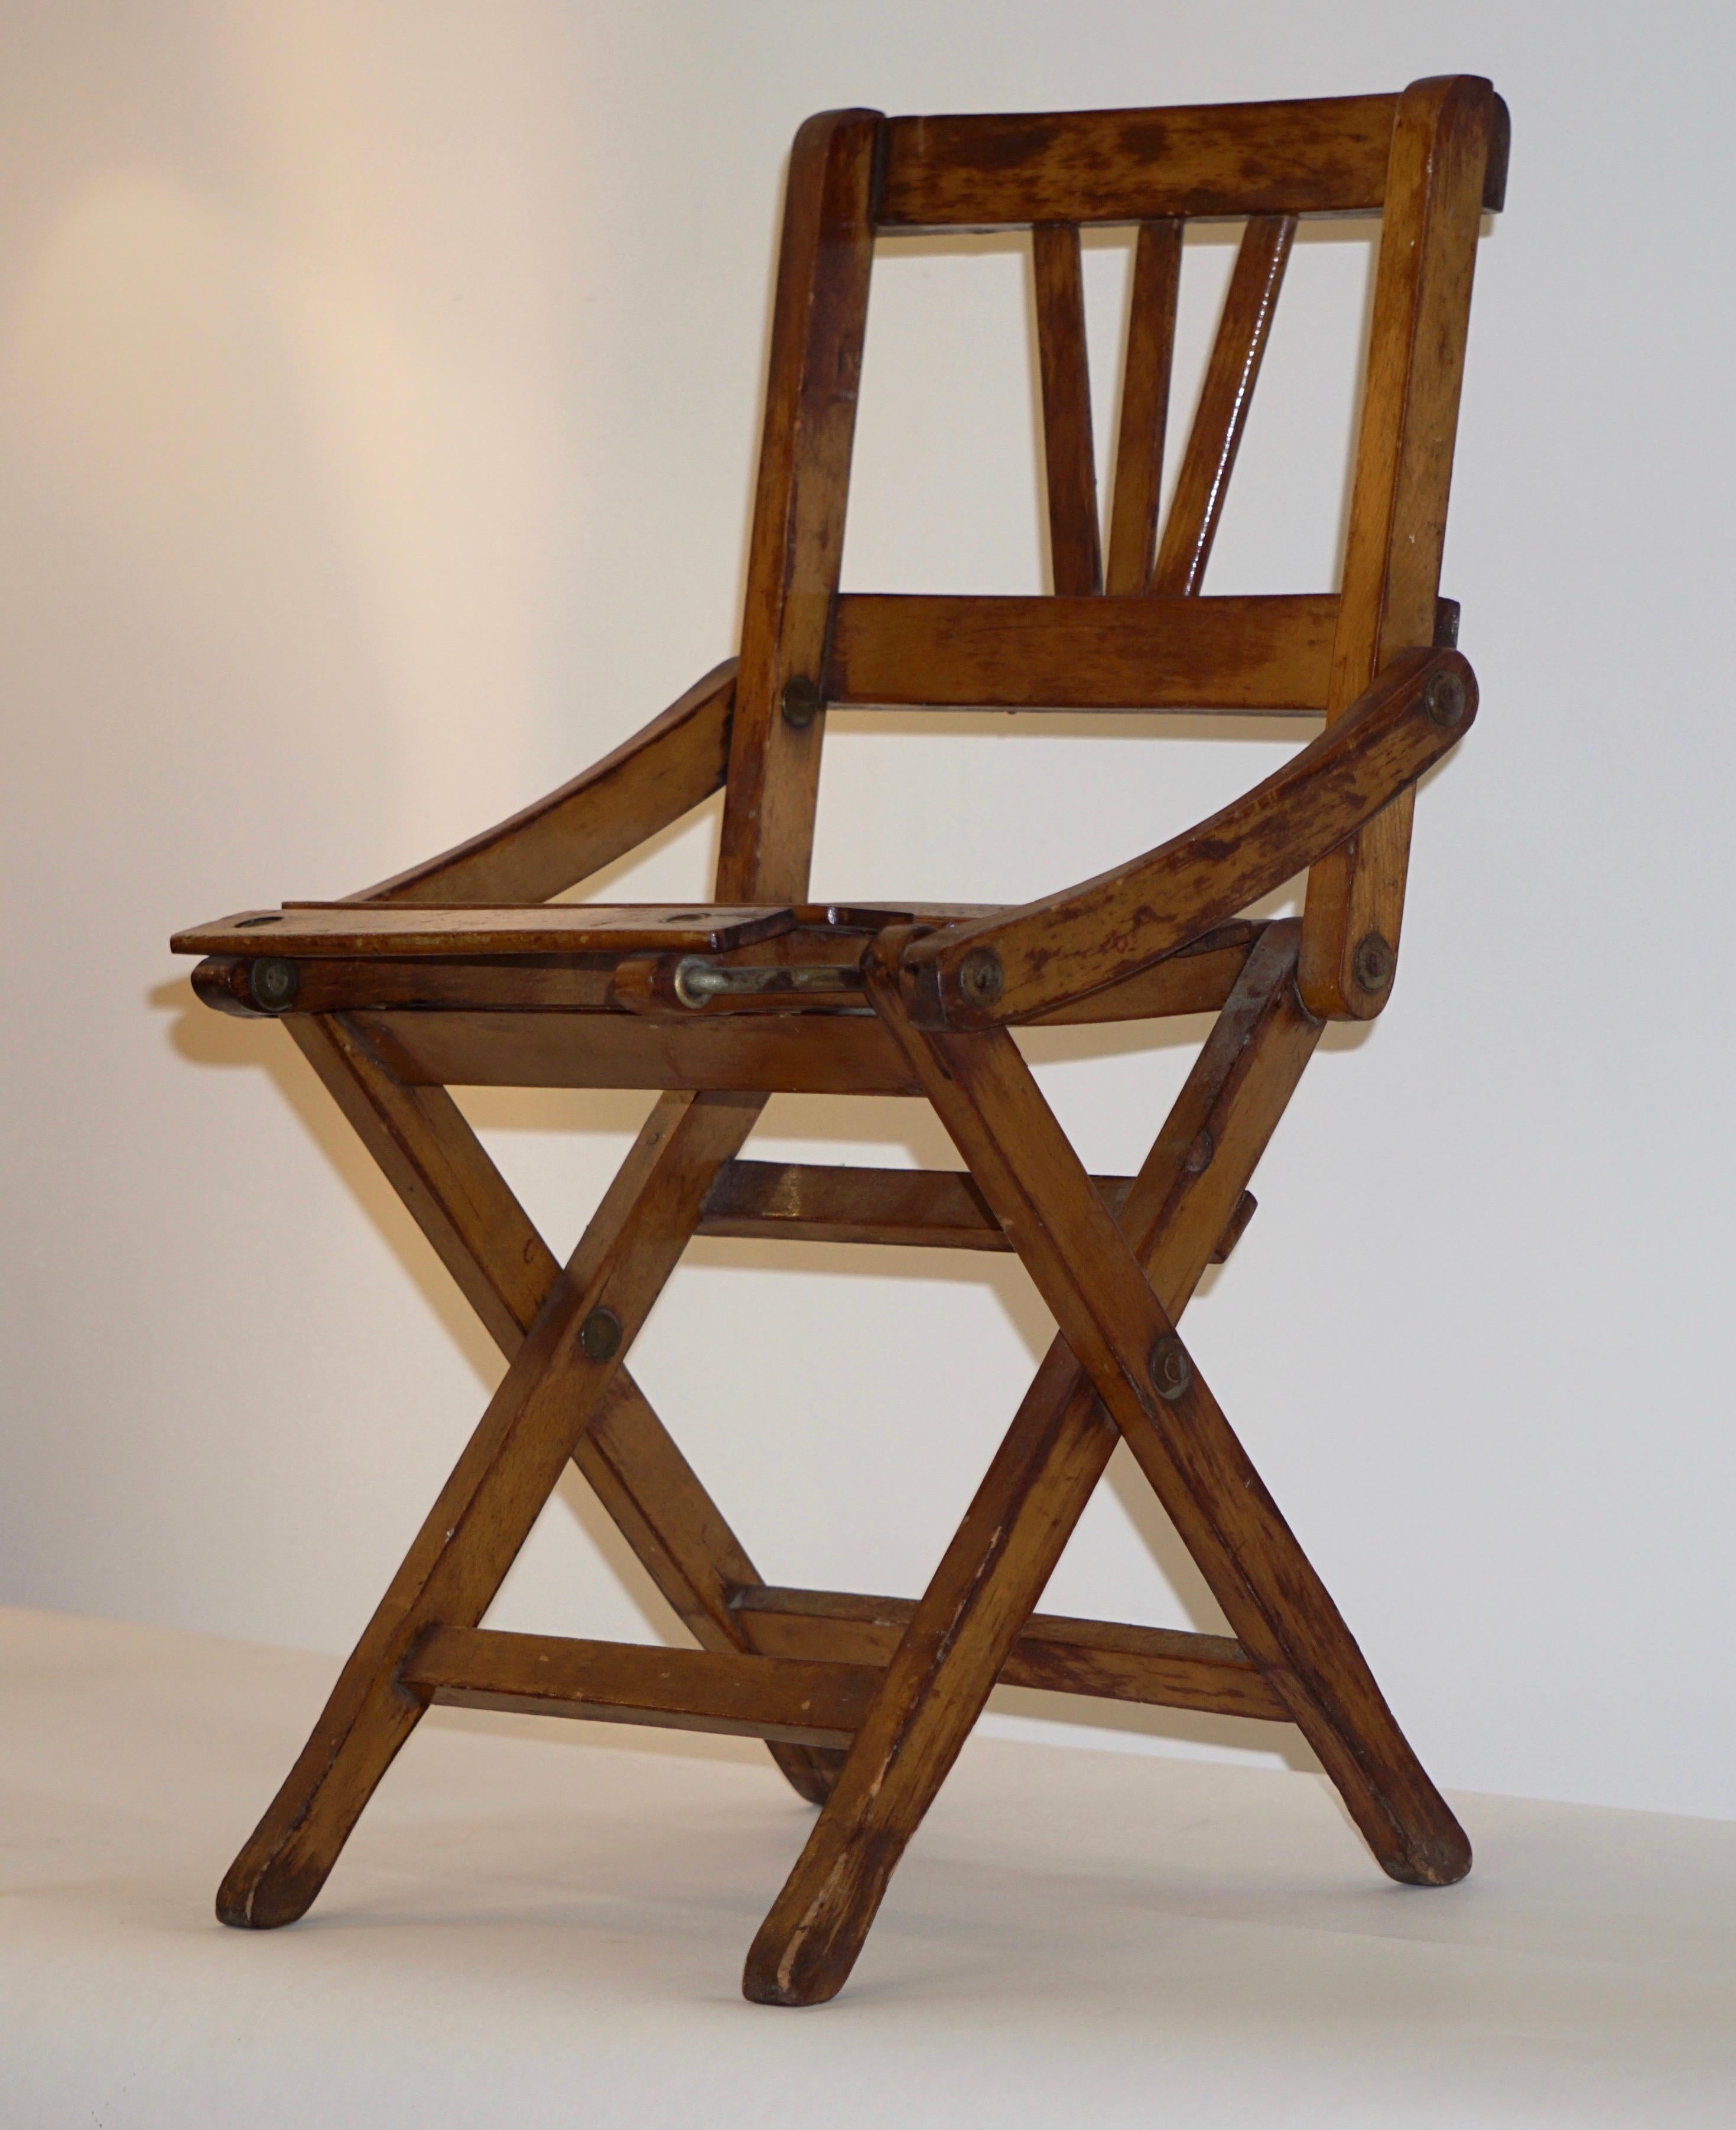 A charming model of a folding chair, entirely handmade in Italy in oak, 
quality of construction and attention to details, in excellent original condition. A decorative item to bring fun or can be used as a doll chair.